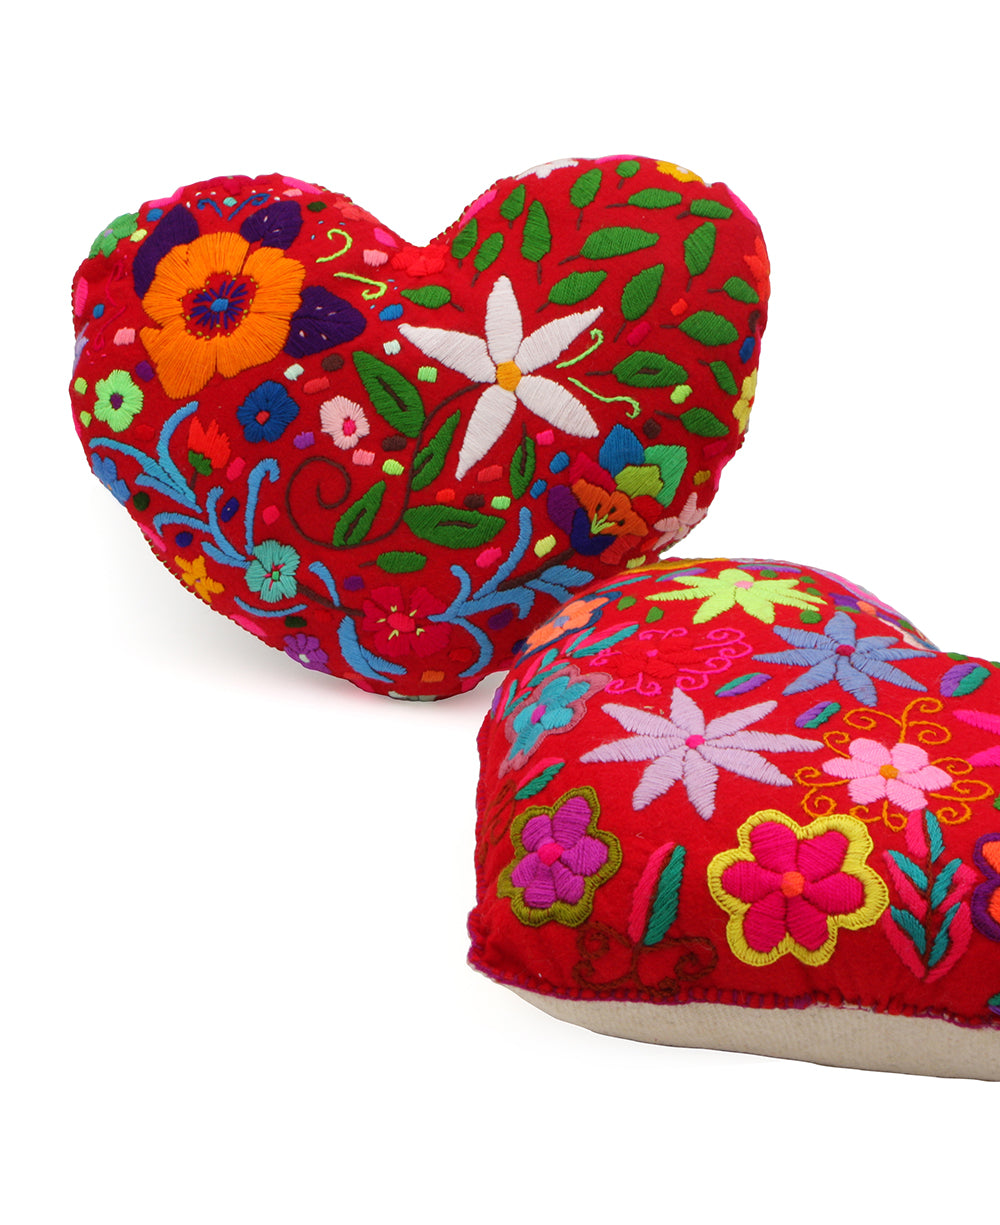 Embroidered Heart Pillows